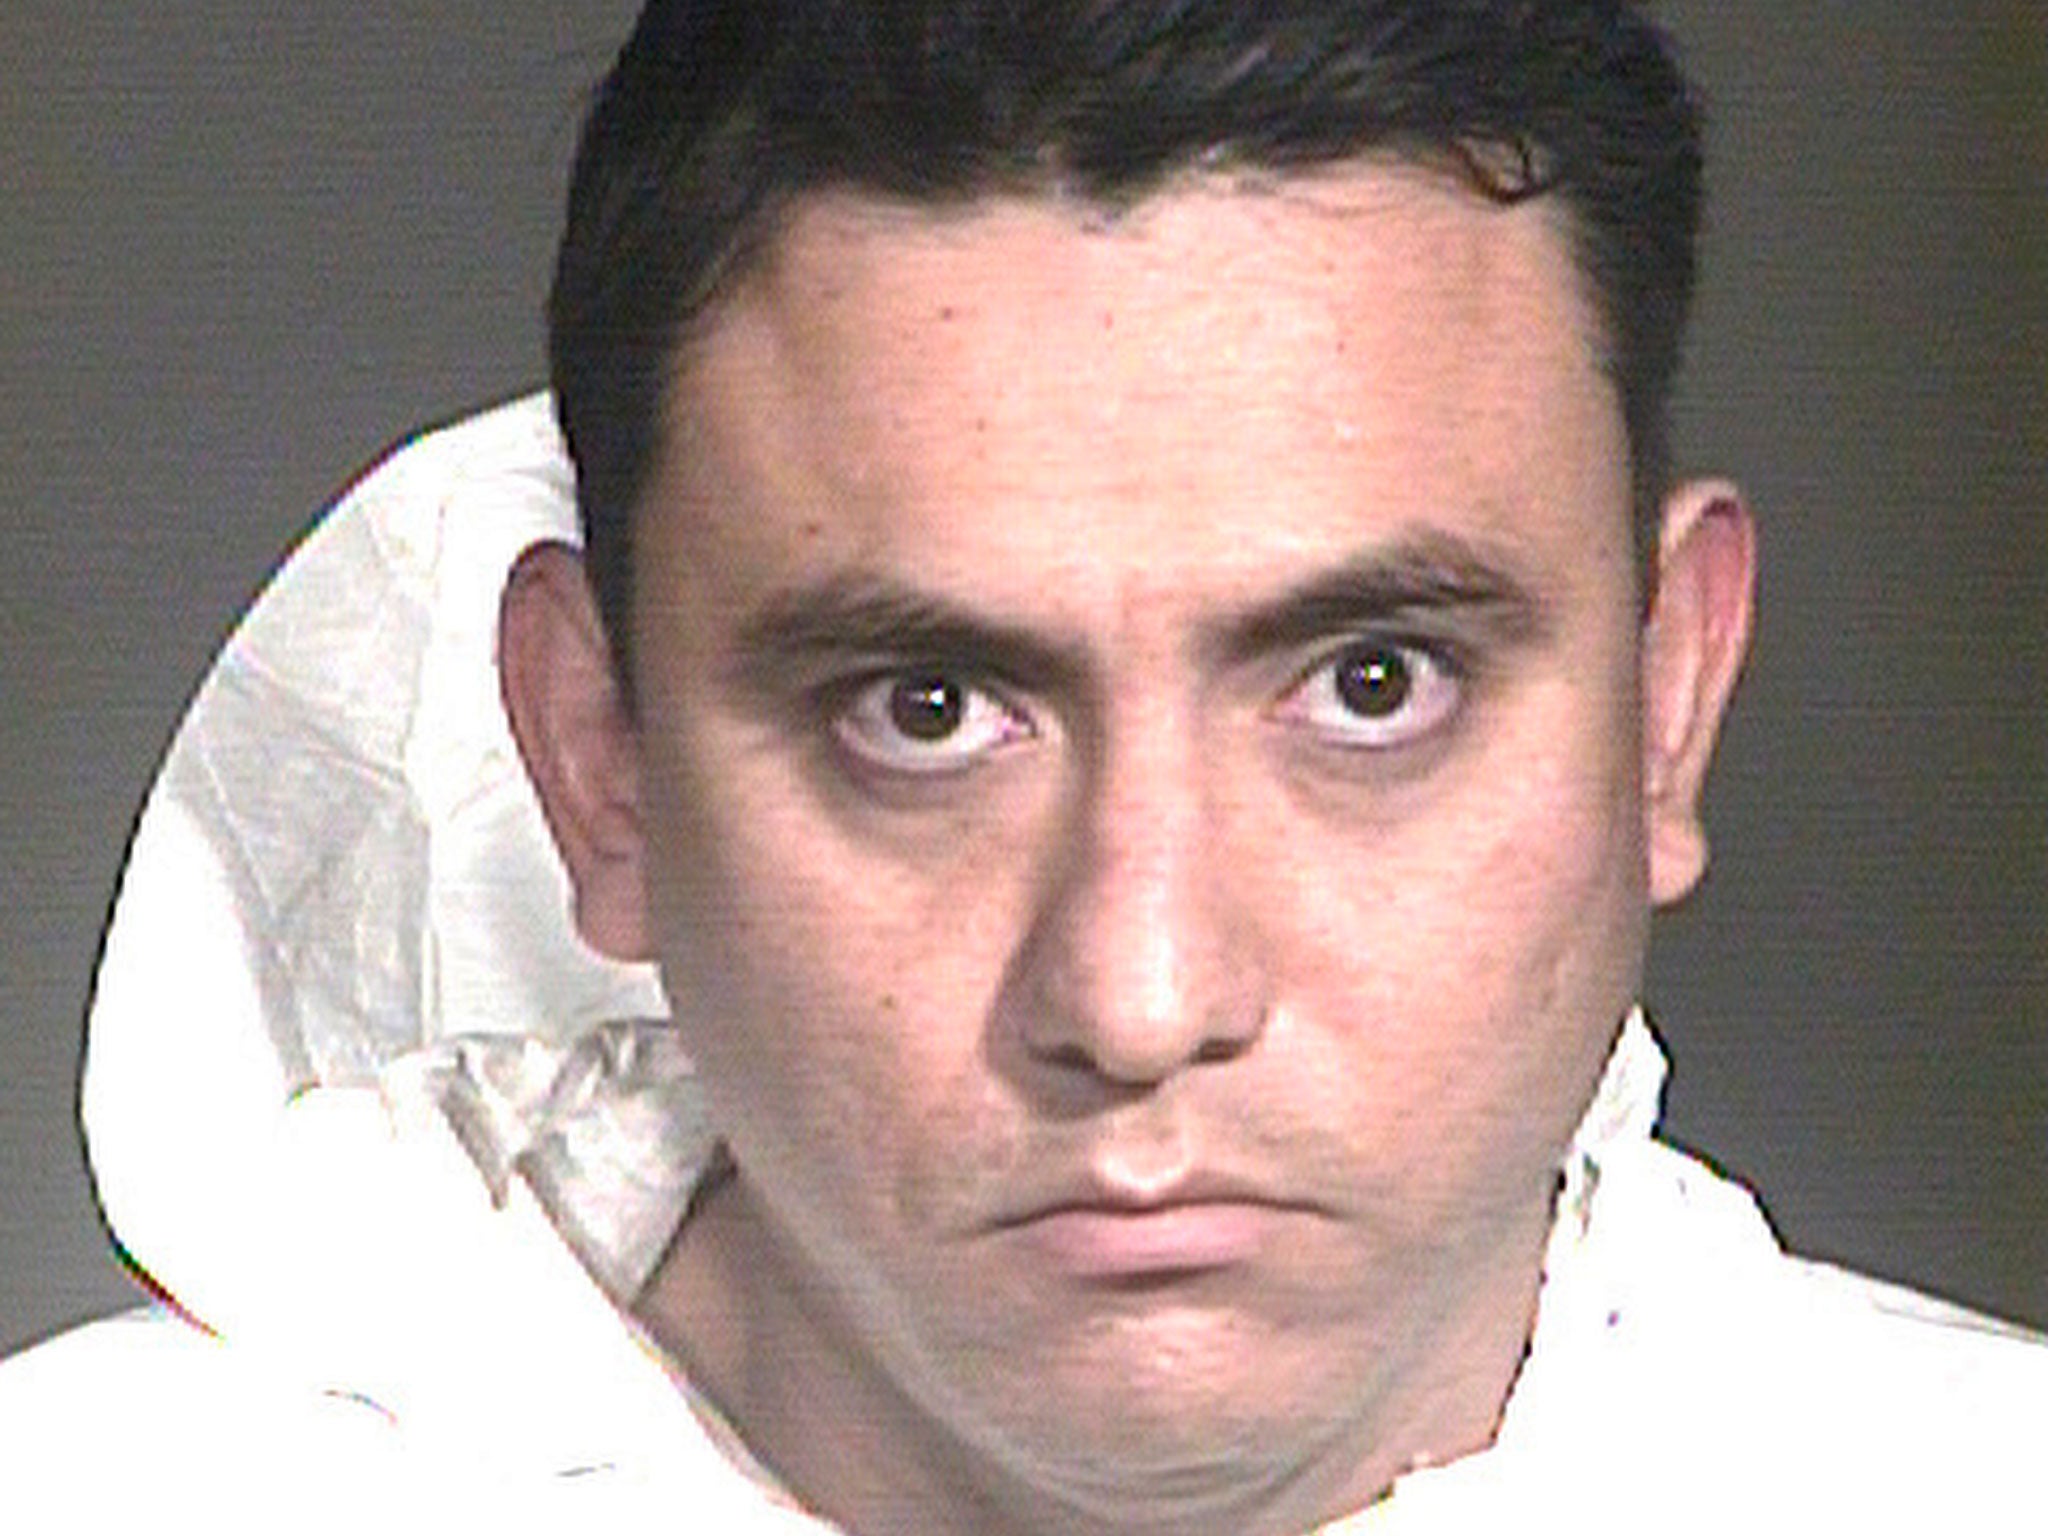 Francisco Rios Covarrubias, was arrested on suspicion of sex trafficking and other crimes